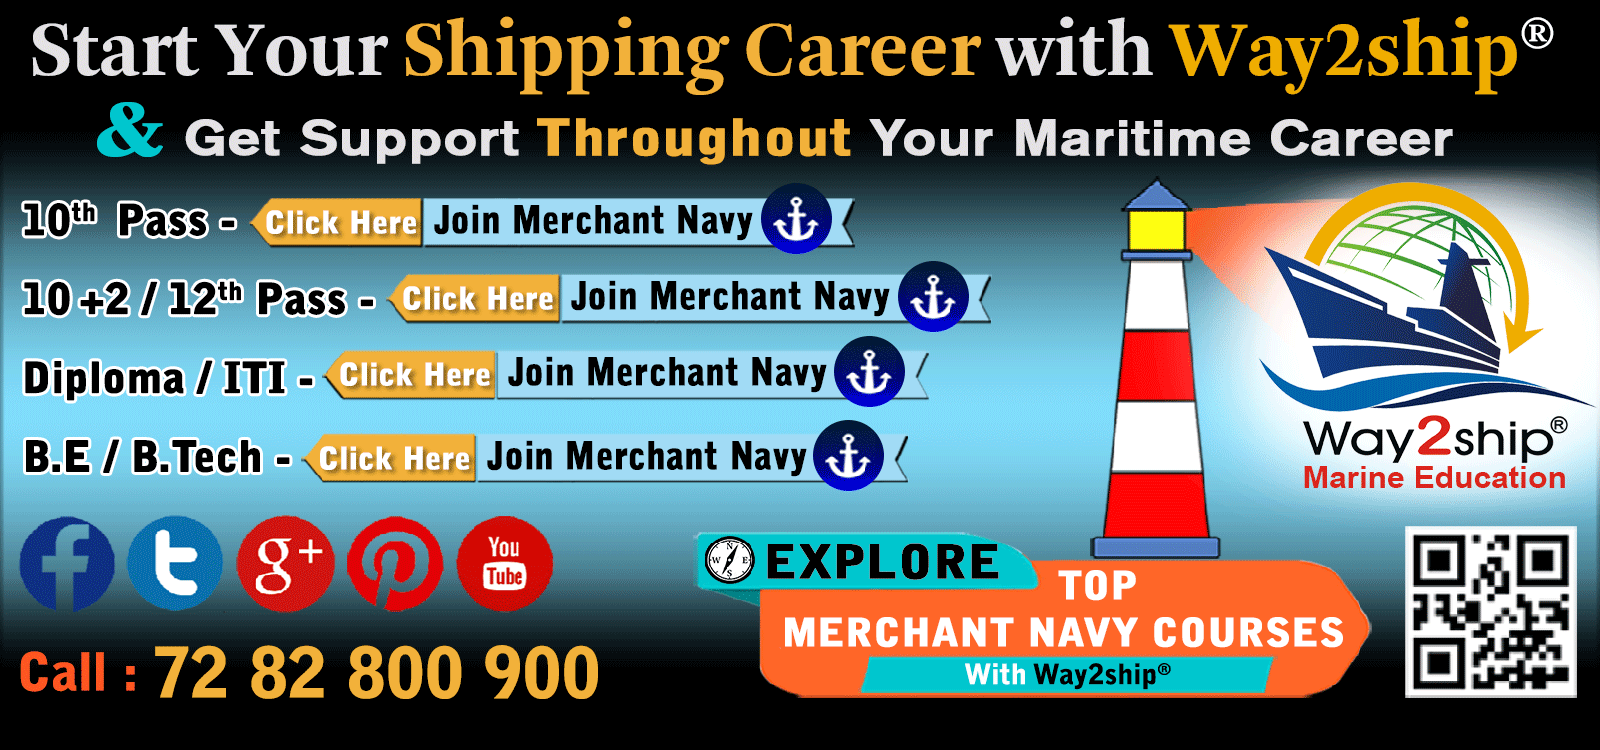 Merchant Navy Admission Notifications 2018-2019 